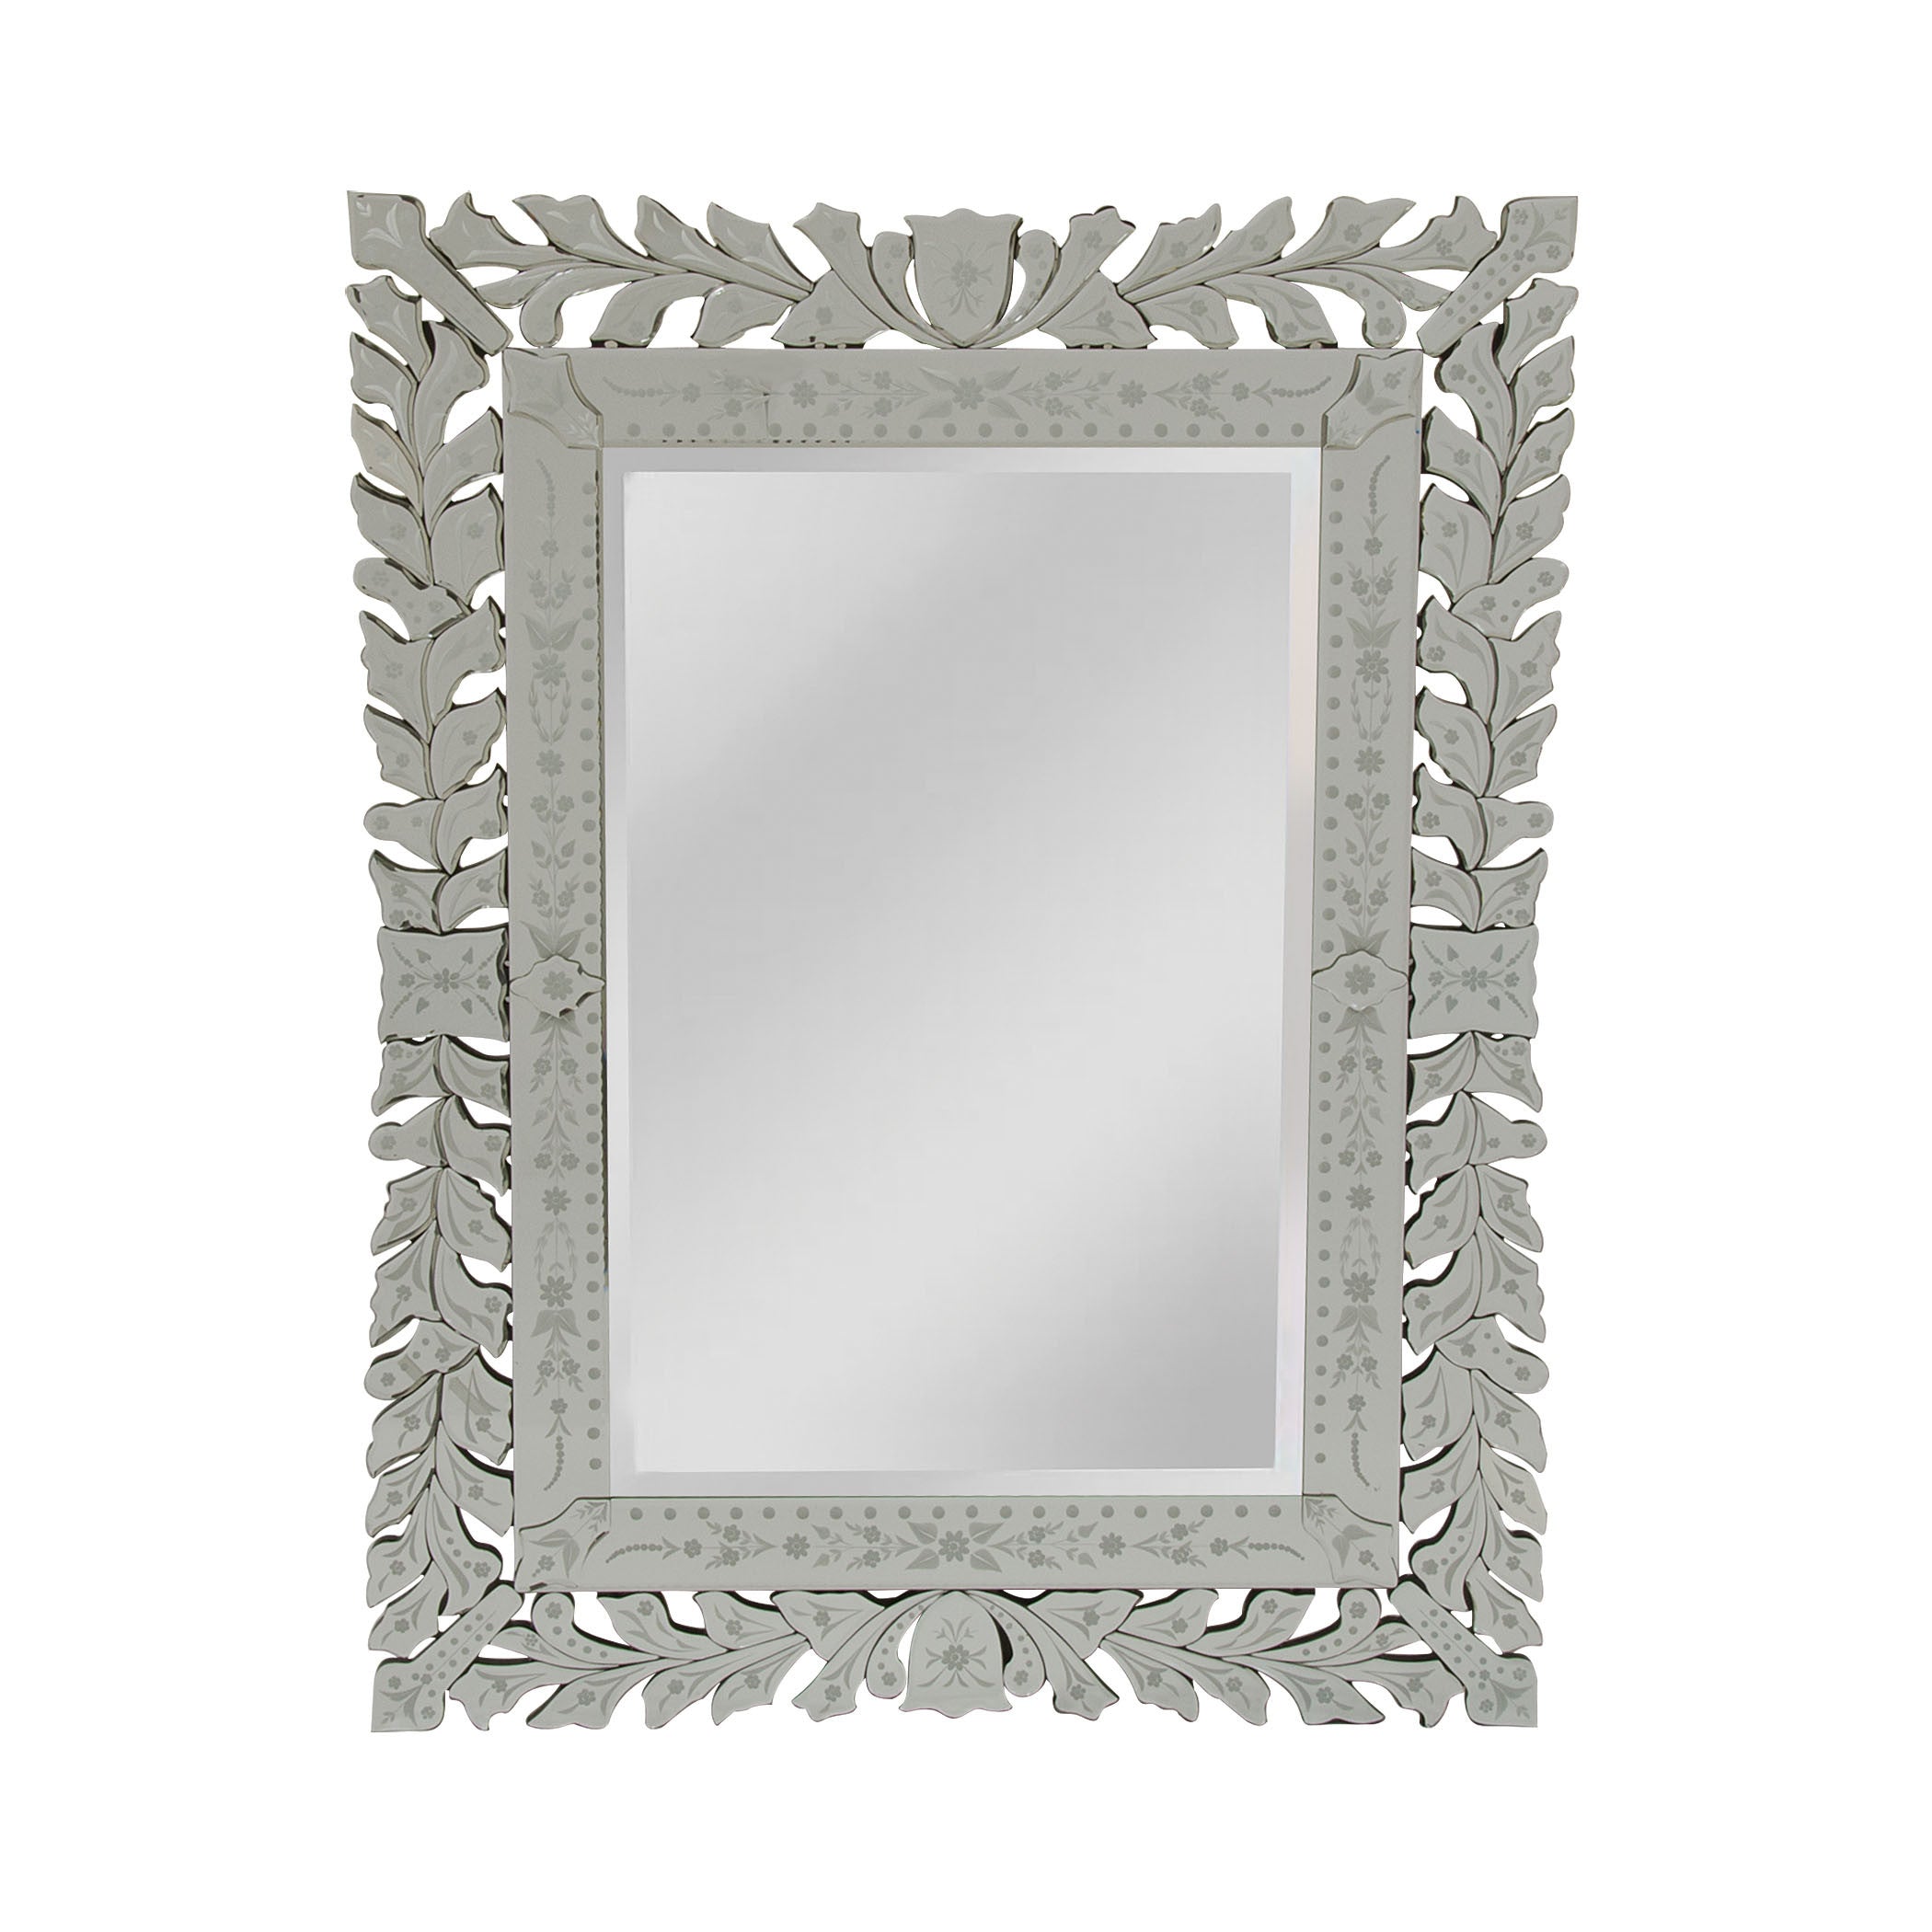 Mirror Masters Mg2350-0011 Cheltemham Collection Clear Finish Wall Mirror